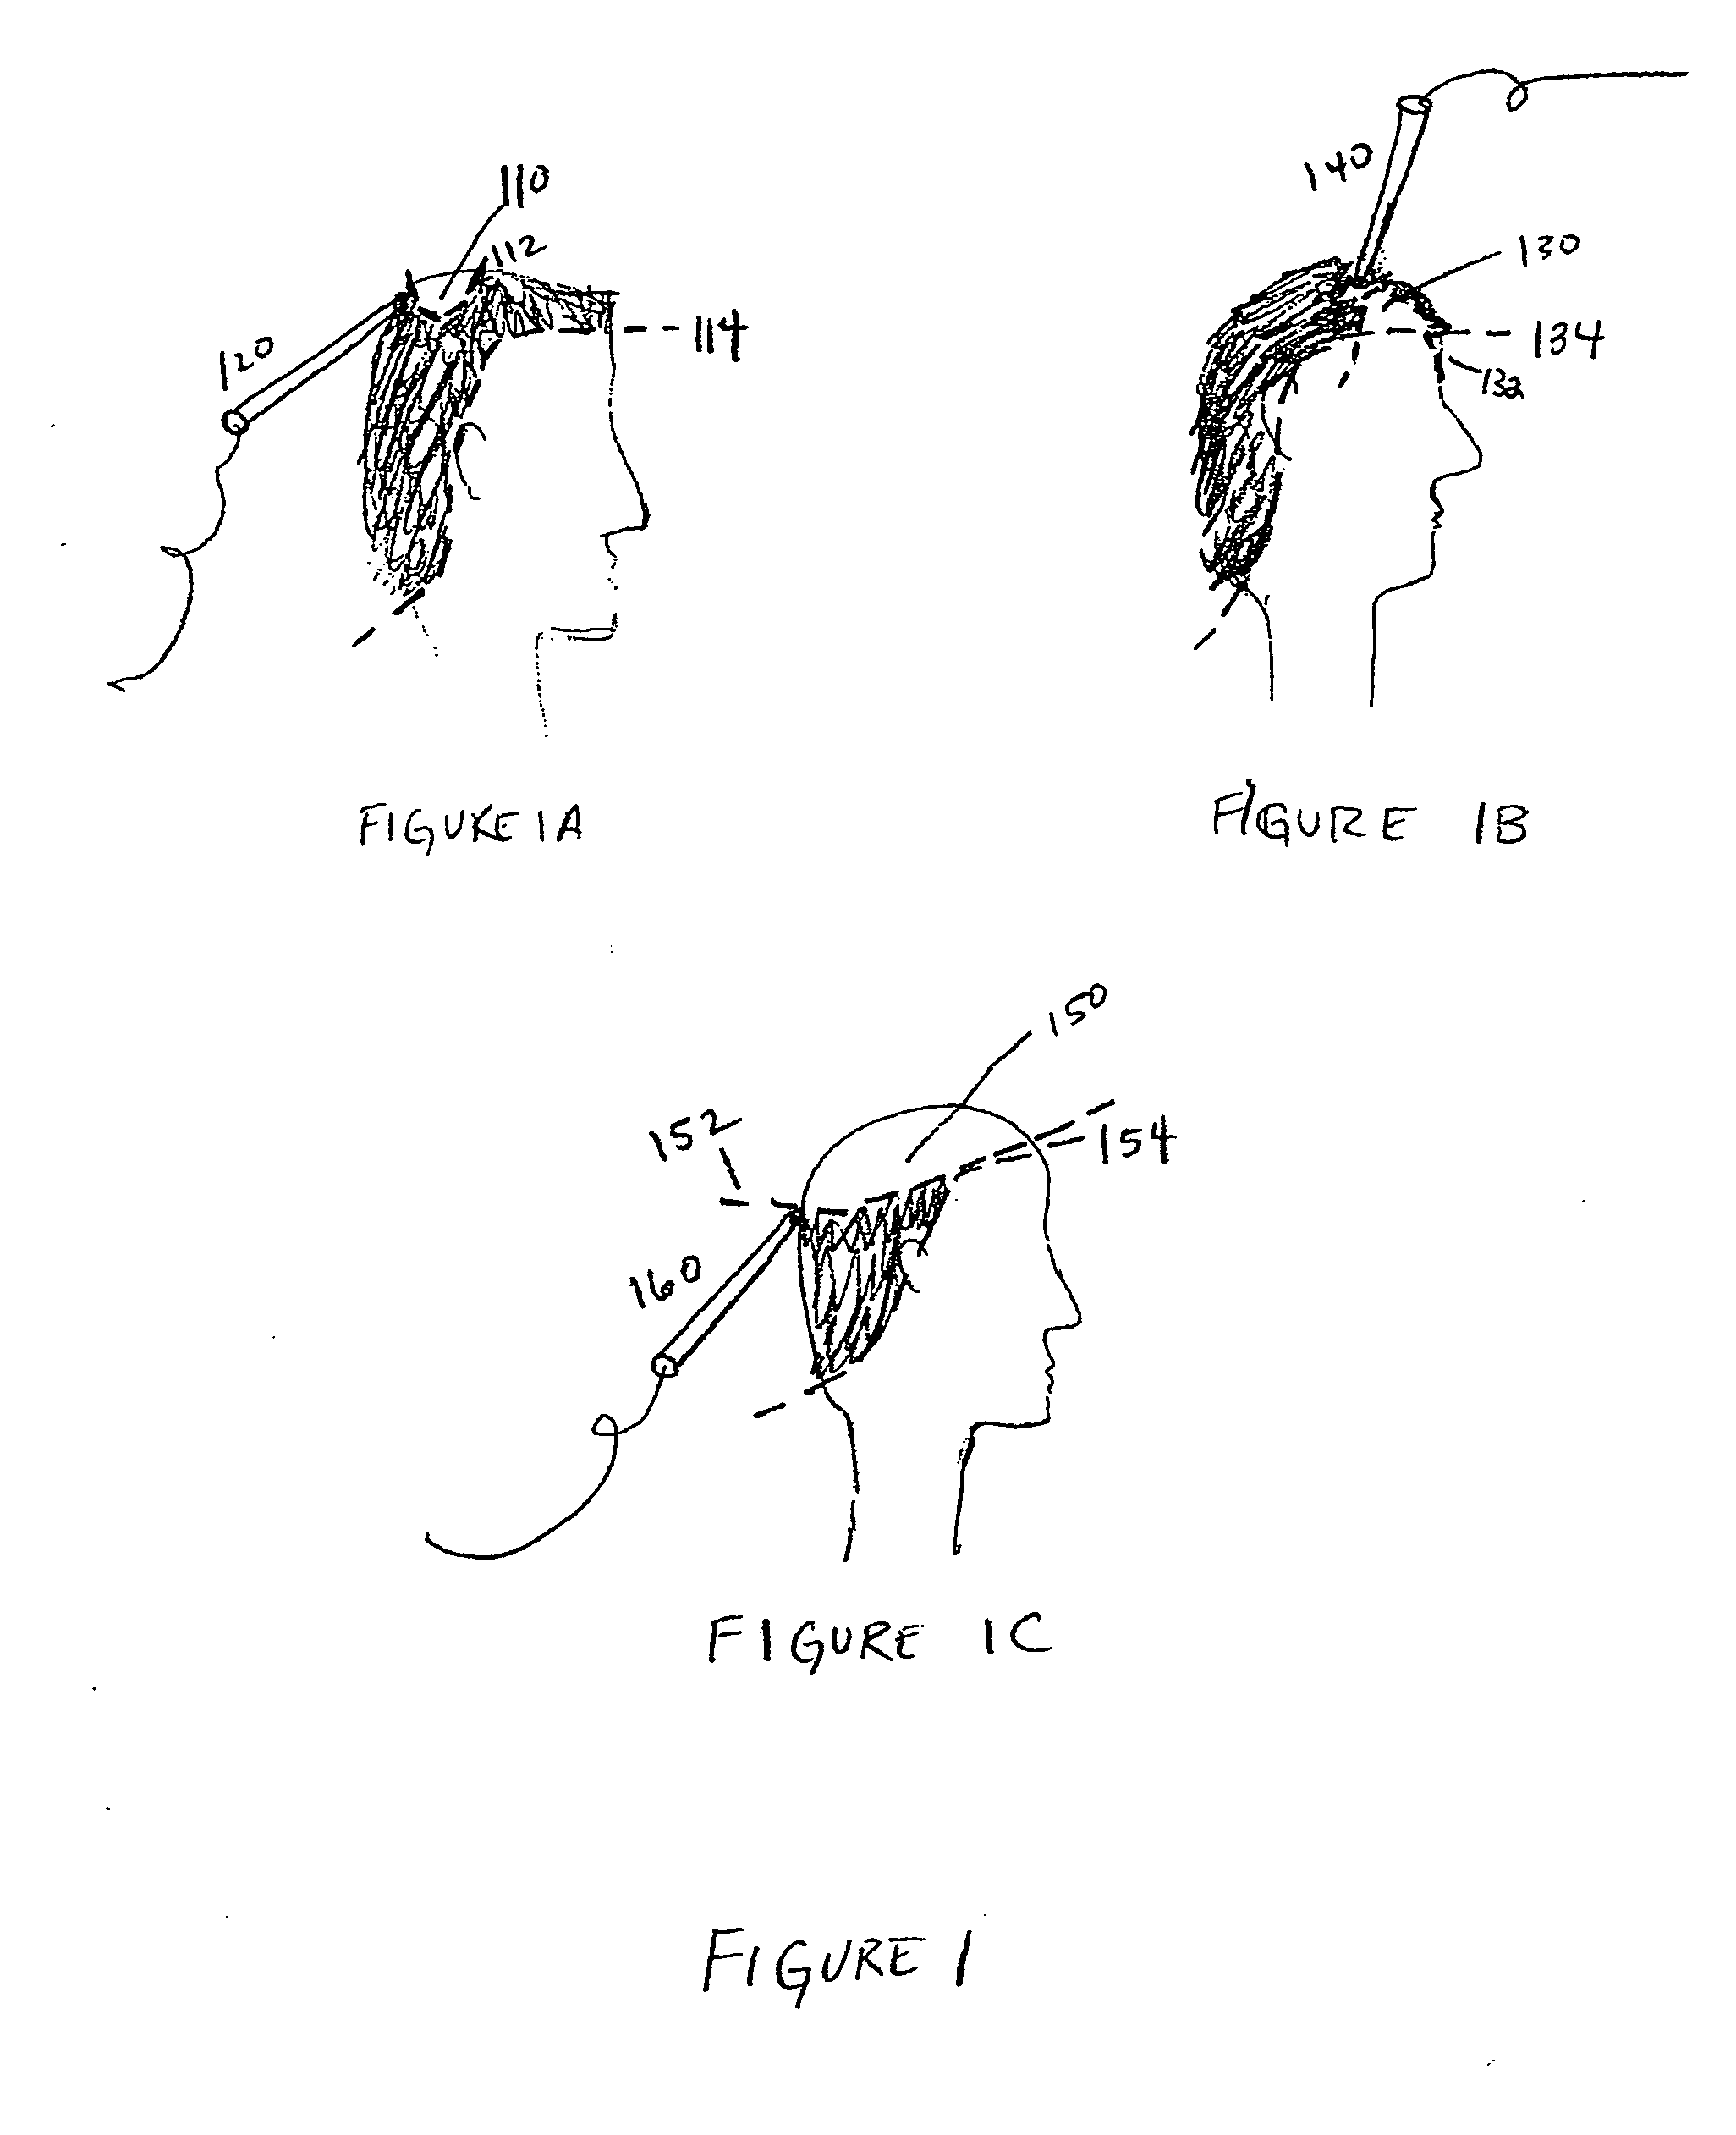 System and method for the digital specification of head shape data for use in developing custom hair pieces